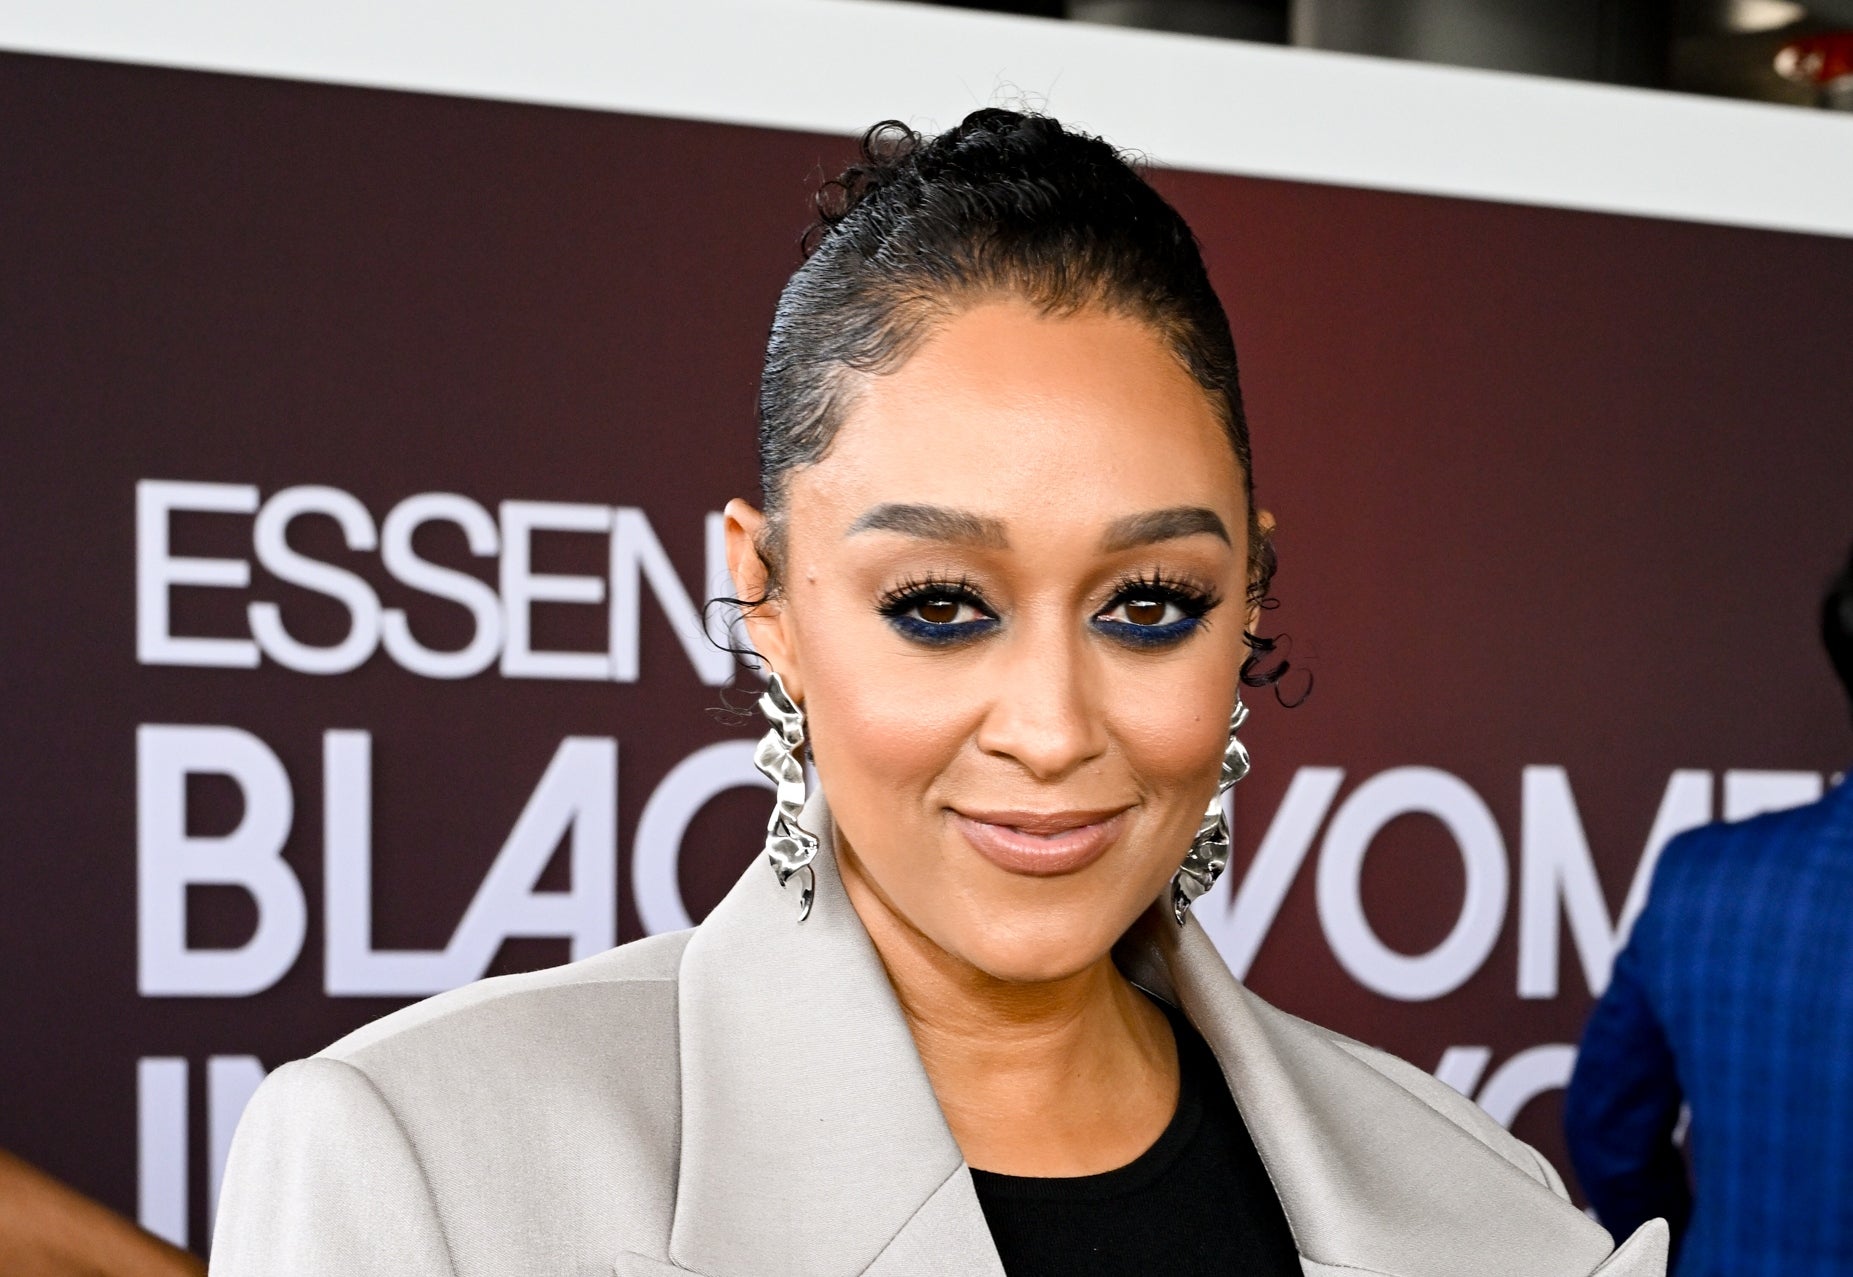 Tia Mowry Shared A Hug With Ex-Husband Cory Hardrict At ESSENCE Black Women In Hollywood